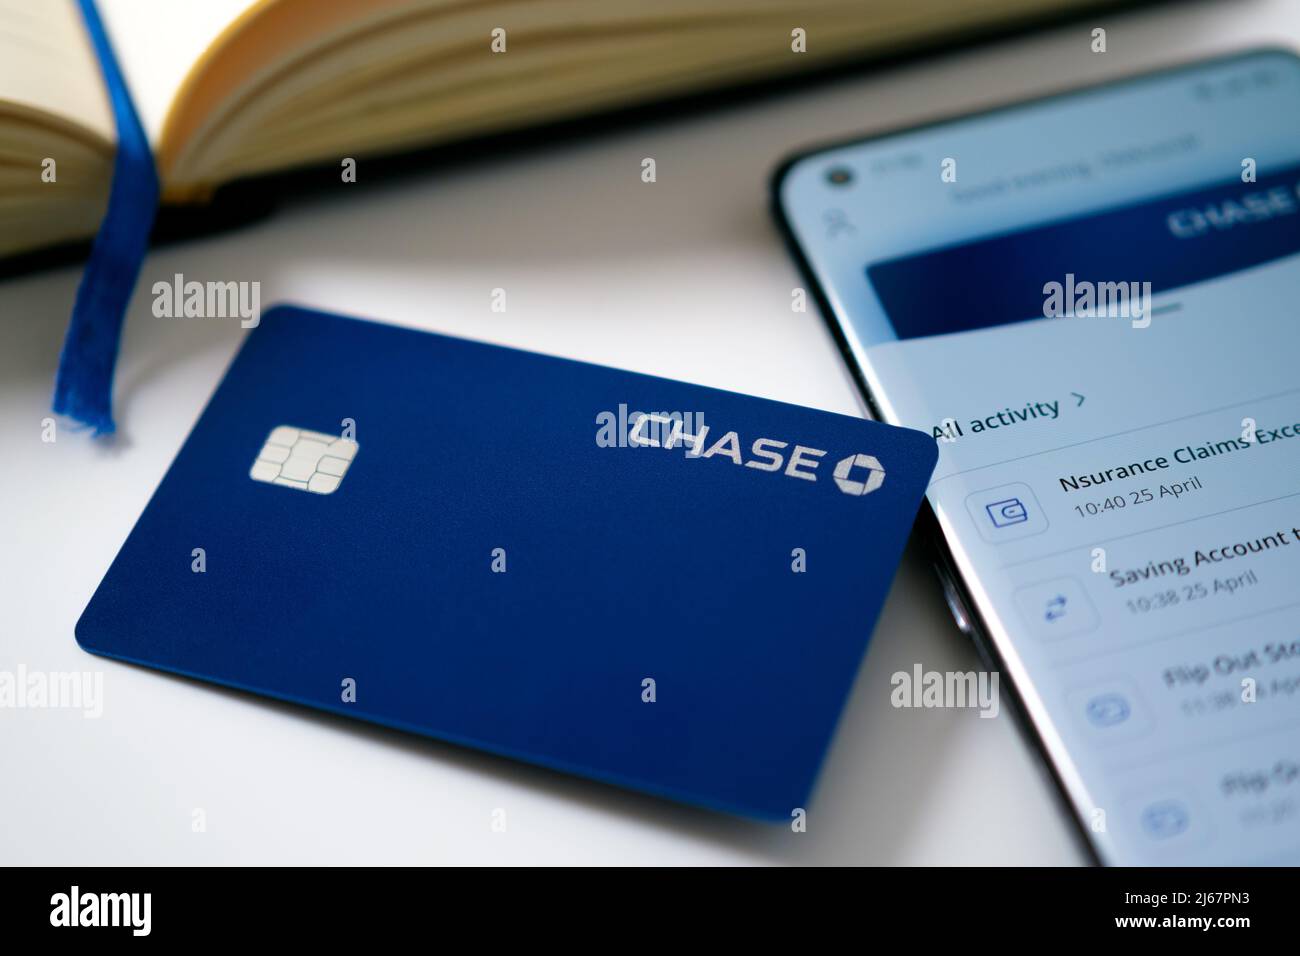 Chase Bank UK debit card. New digital-only bank launched in the UK by JP Morgan. Stafford, United Kingdom, April 28, 2022 Stock Photo